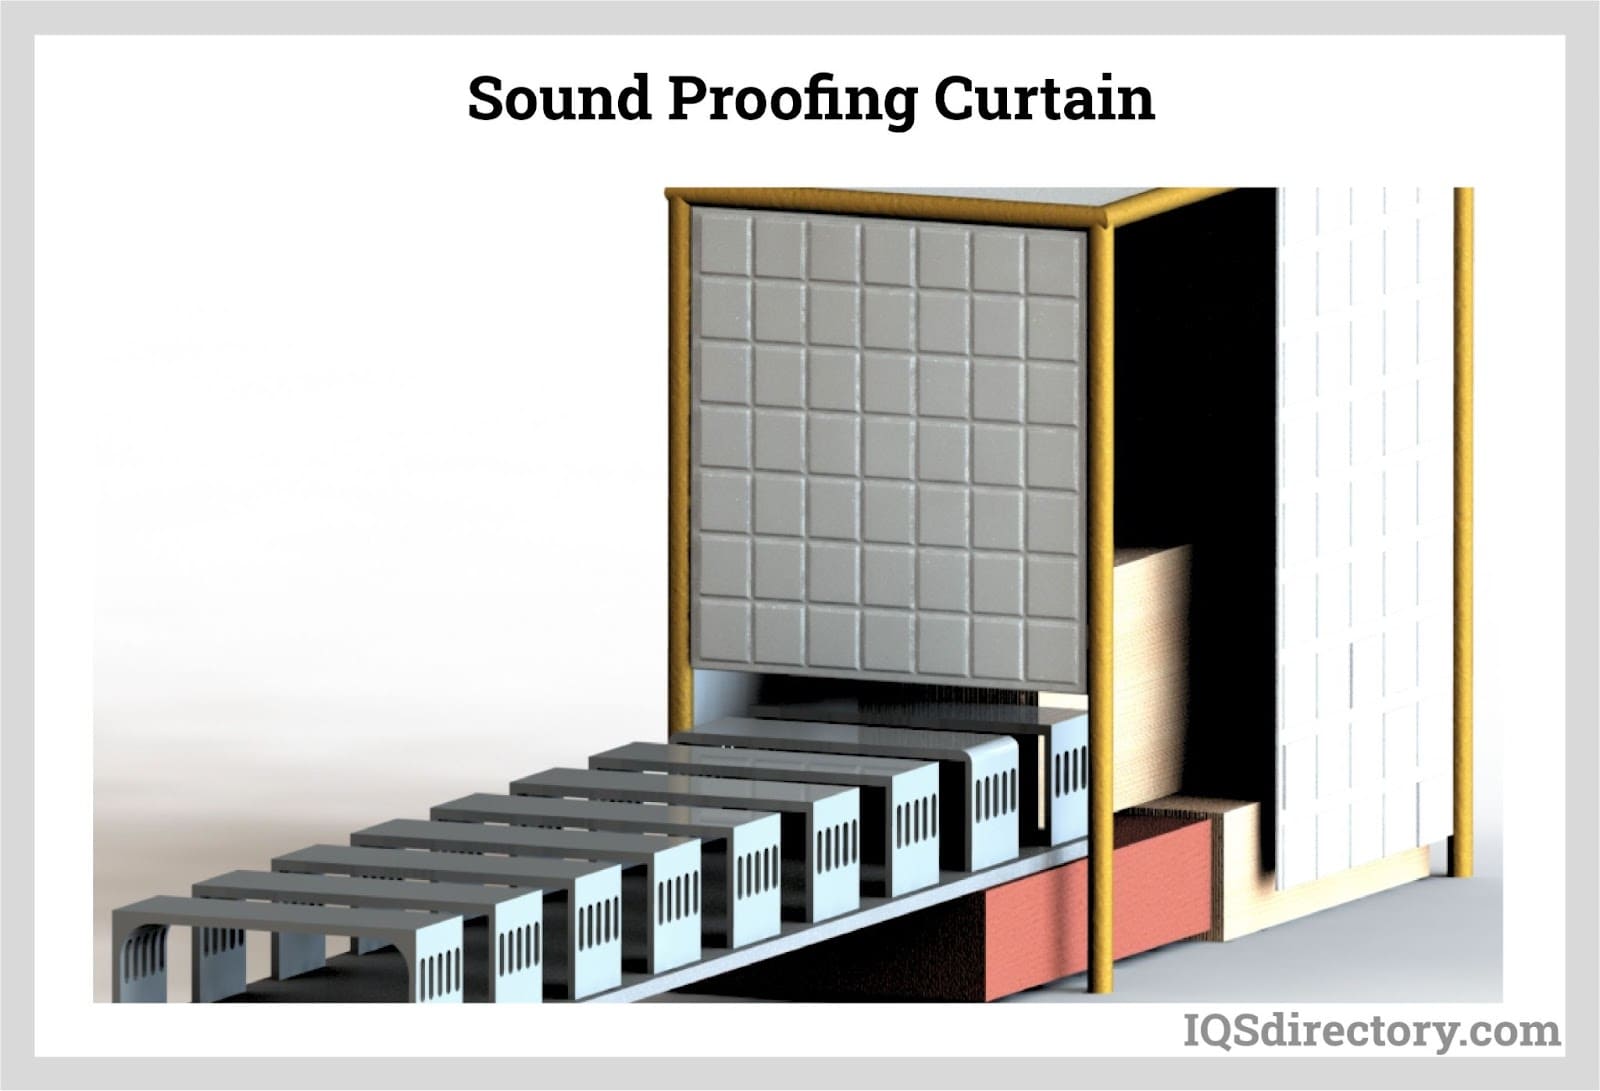  SoundProofing Curtain